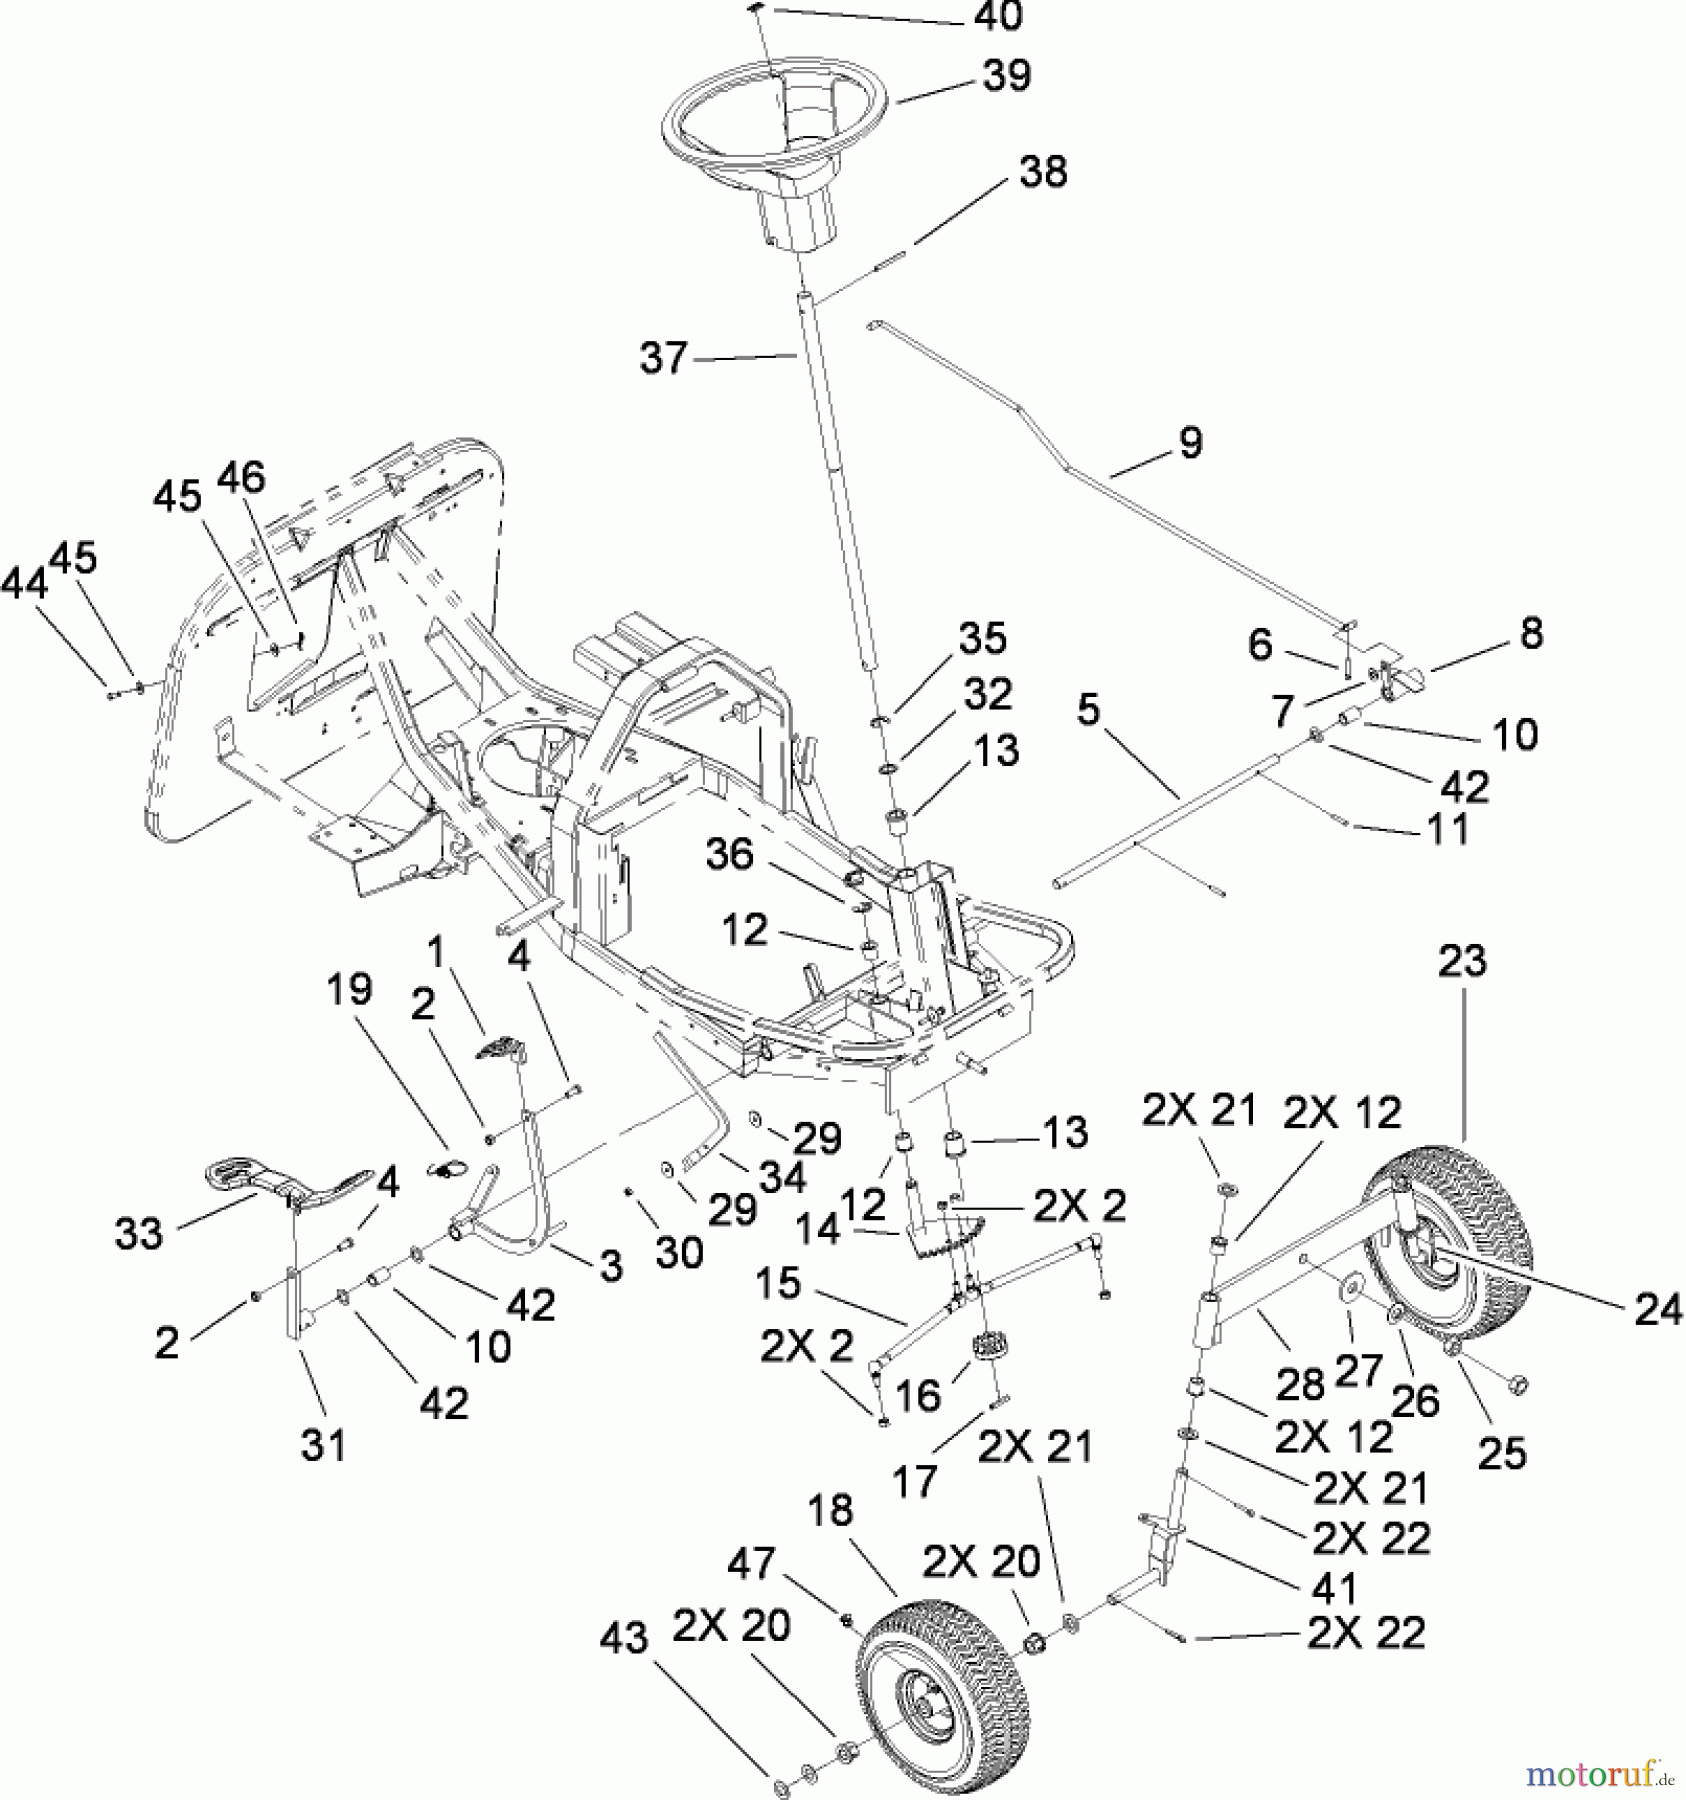  Toro Neu Mowers, Rear-Engine Rider 70186 (H132) - Toro H132 Rear-Engine Riding Mower, 2007 (260732867-270805635) FRONT AXLE AND STEERING ASSEMBLY